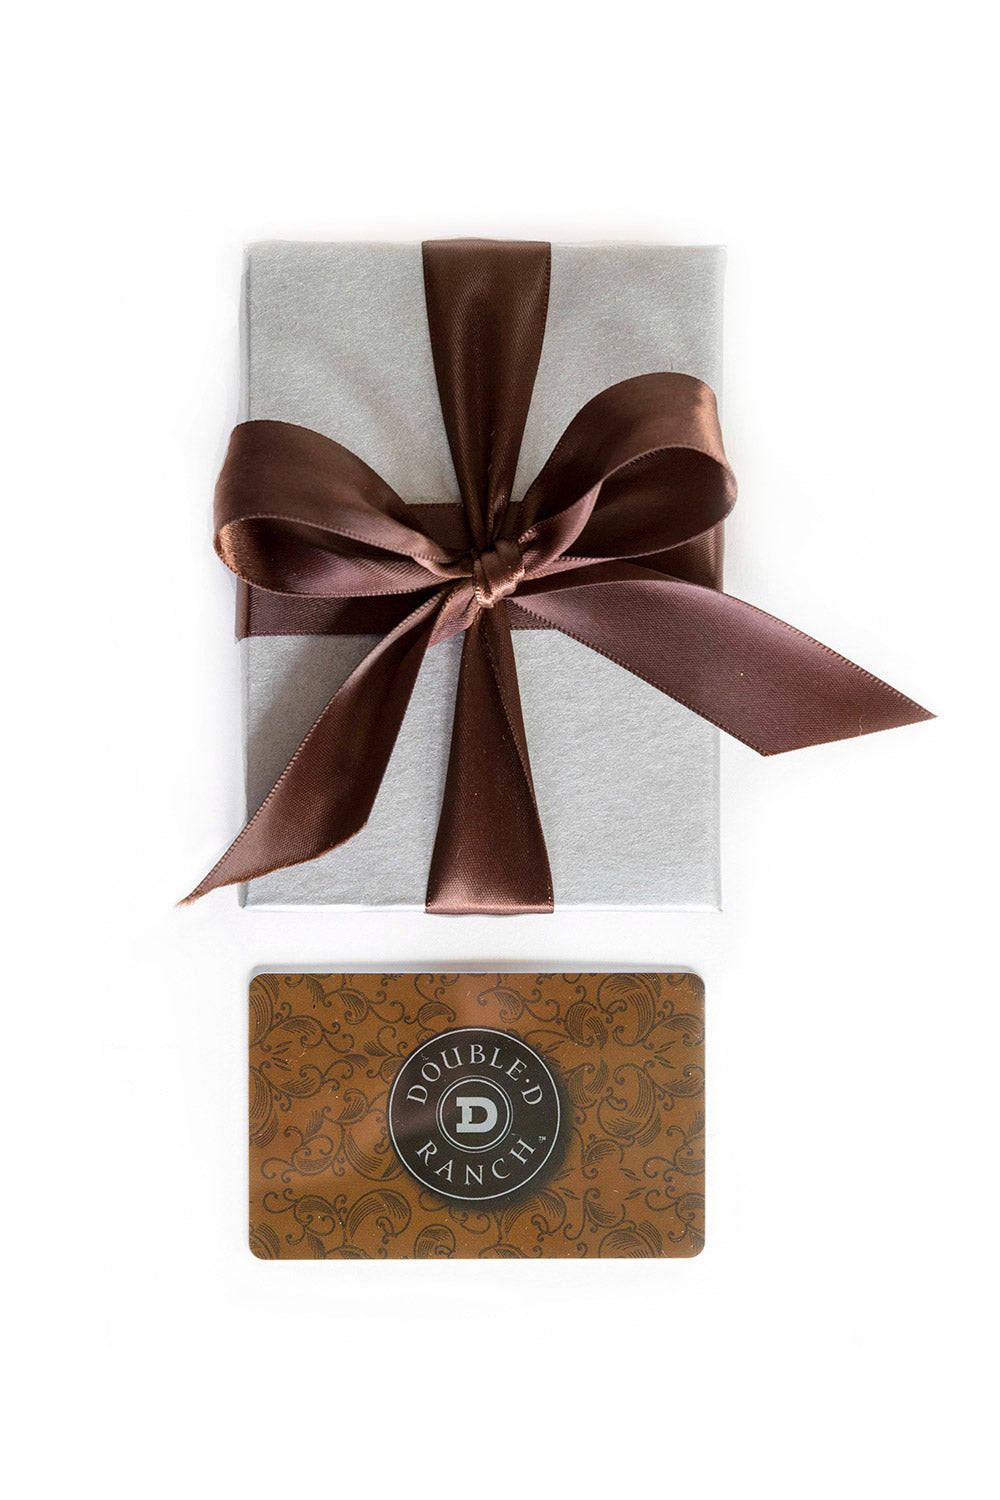 Double D Ranch Gift Card